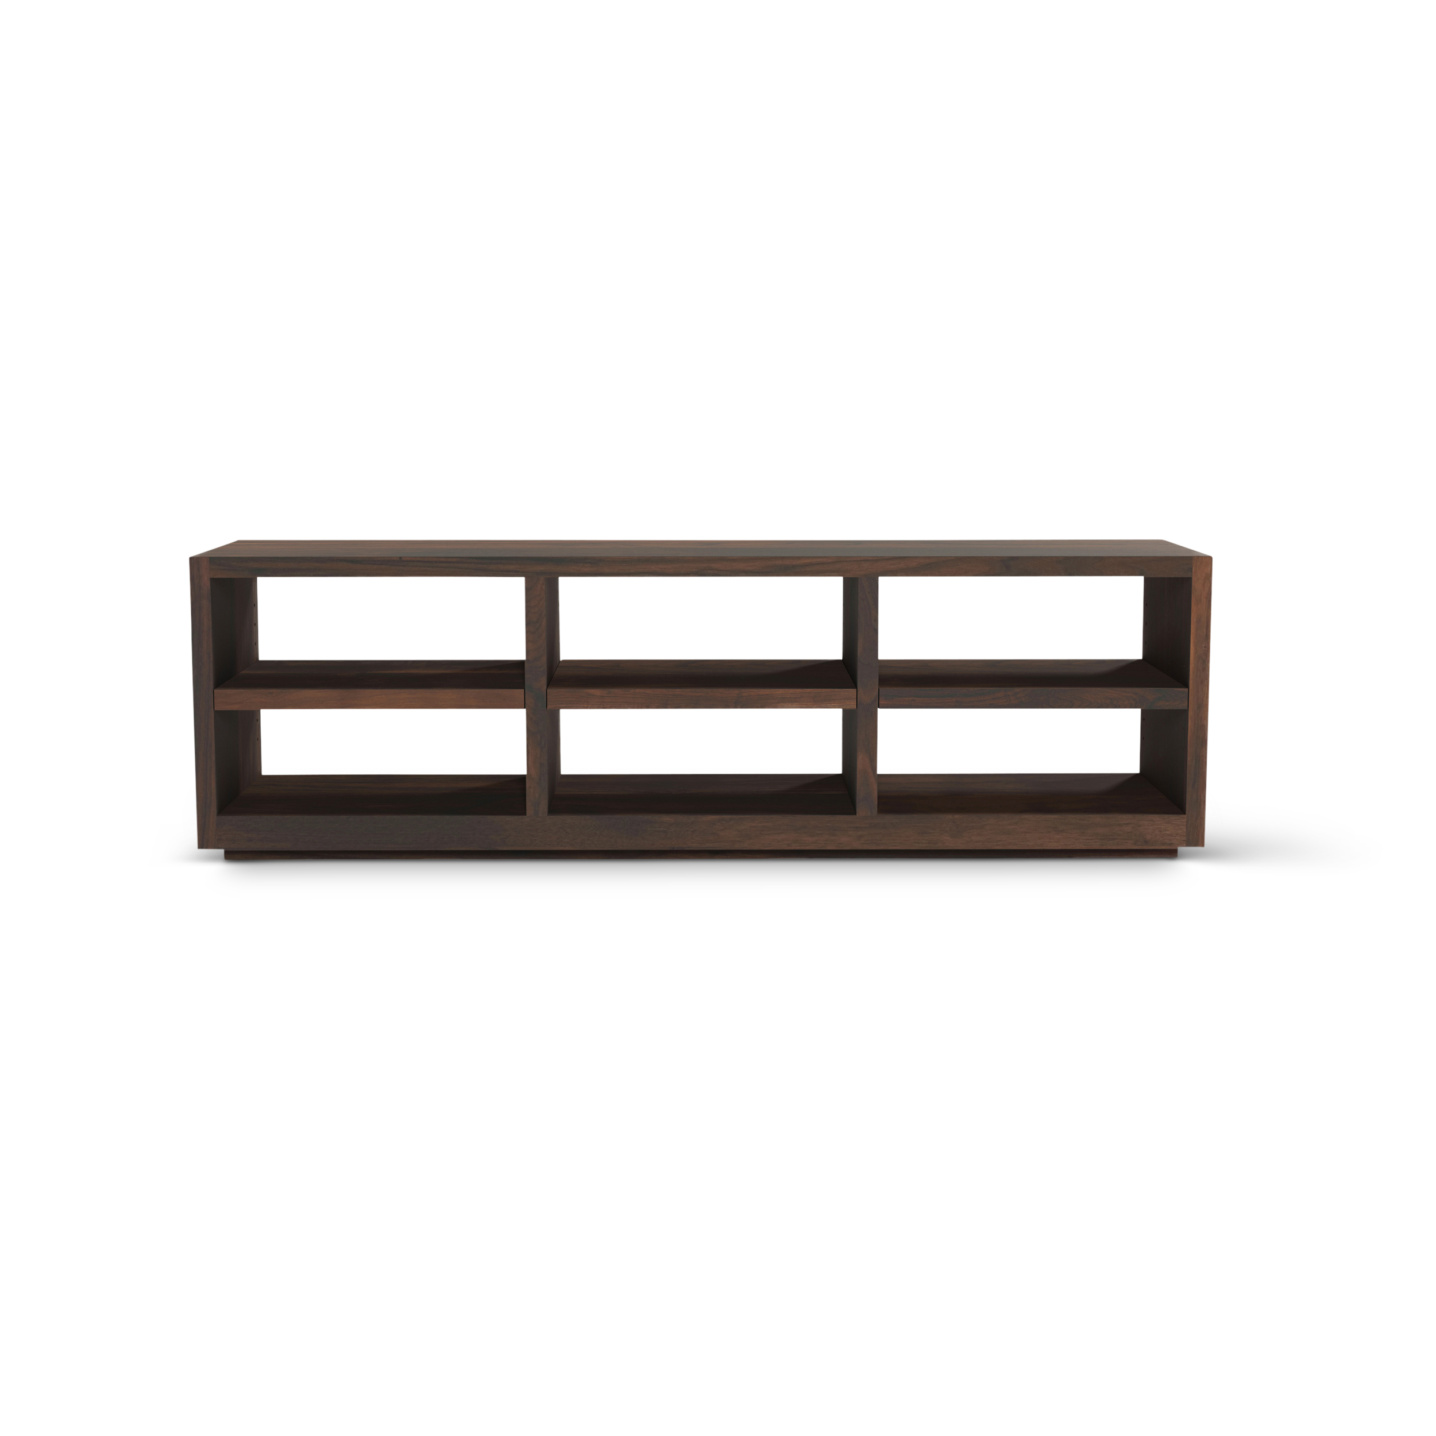 Horizontal bookcase made in solid walnut